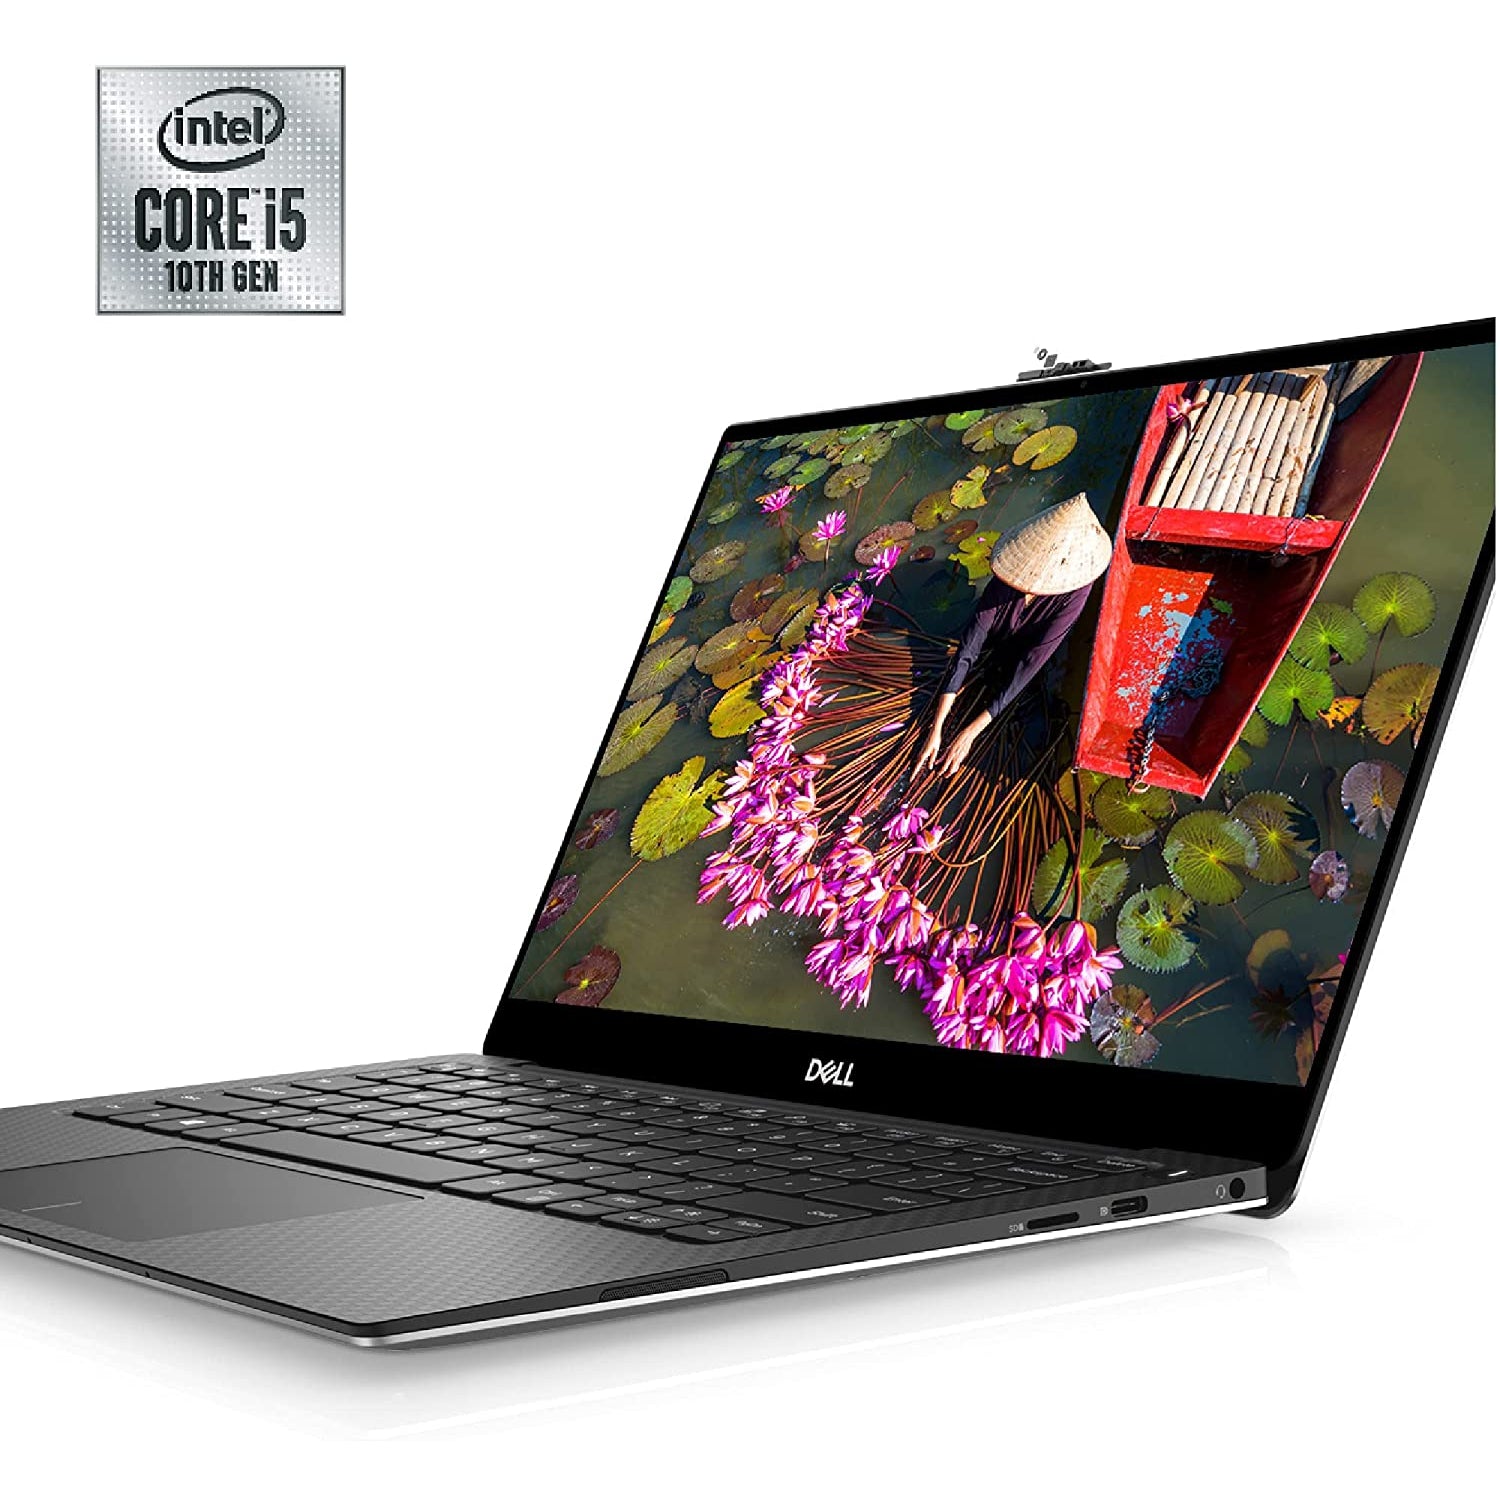 Dell XPS 13 FHD Thin and Light, InfinityEdge Laptop, Intel Core i5-10210U, 8 GB RAM, 256GB SSD, Windows 10 Home, Silver